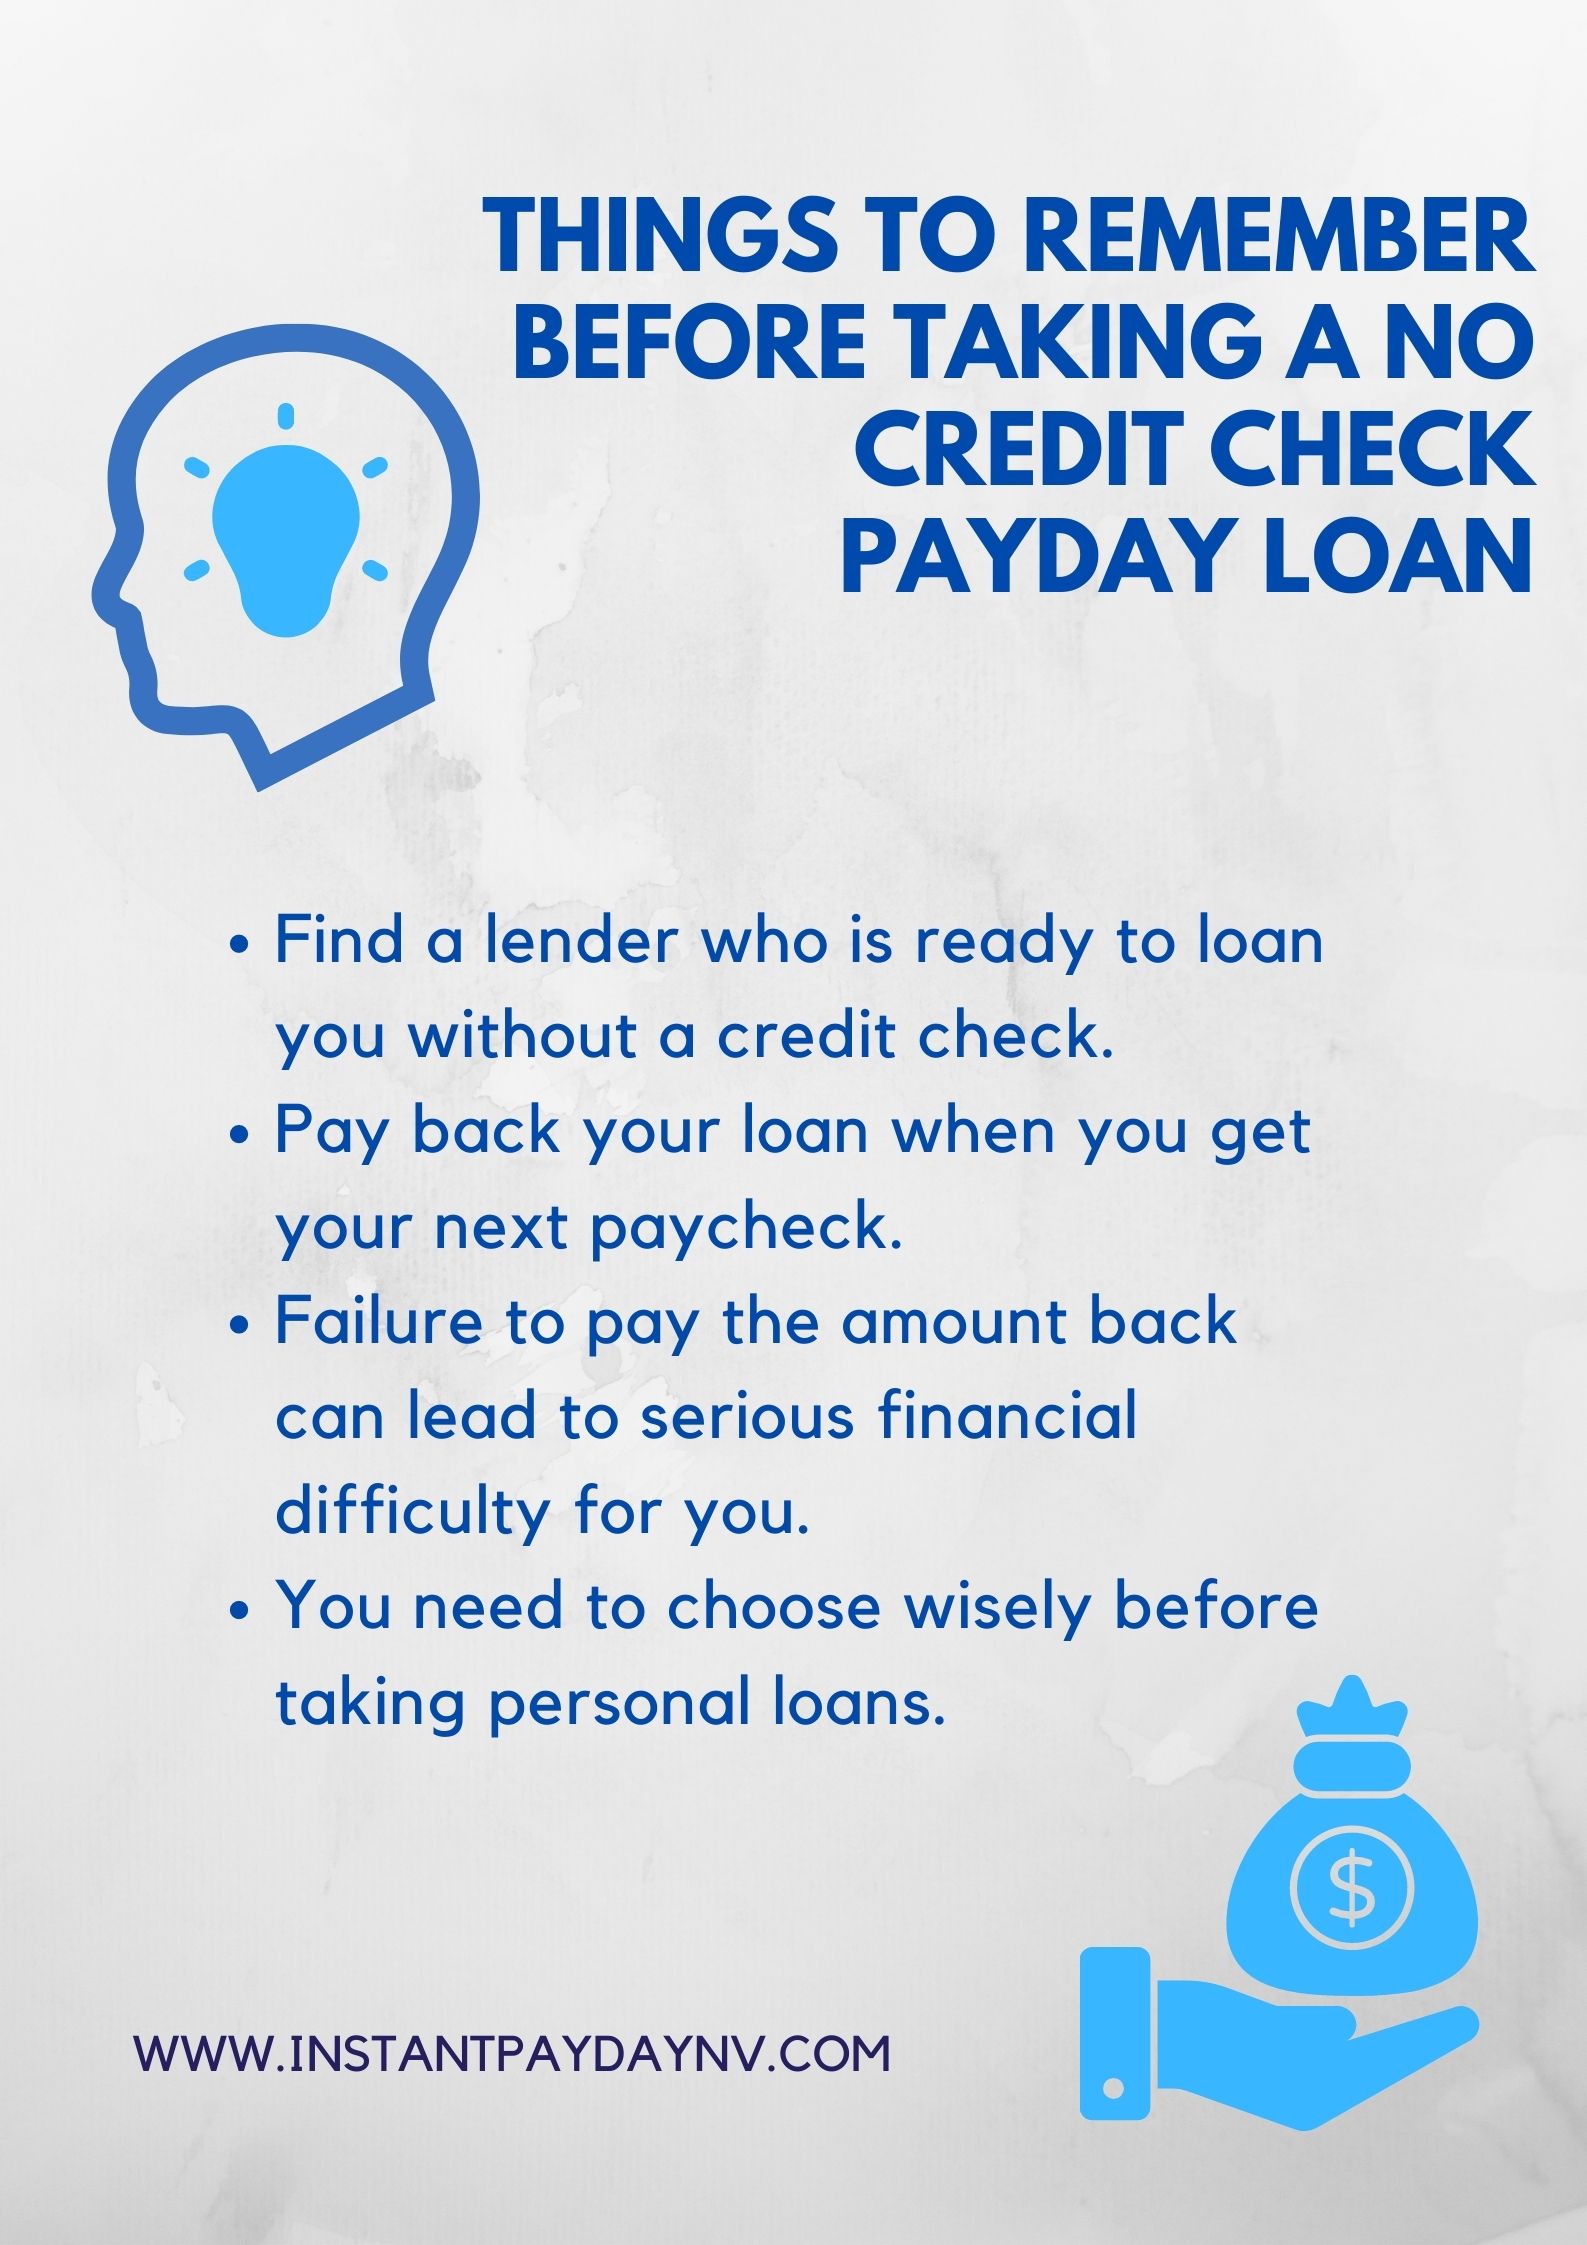 Things to remember before taking a No Credit Check Payday Loan